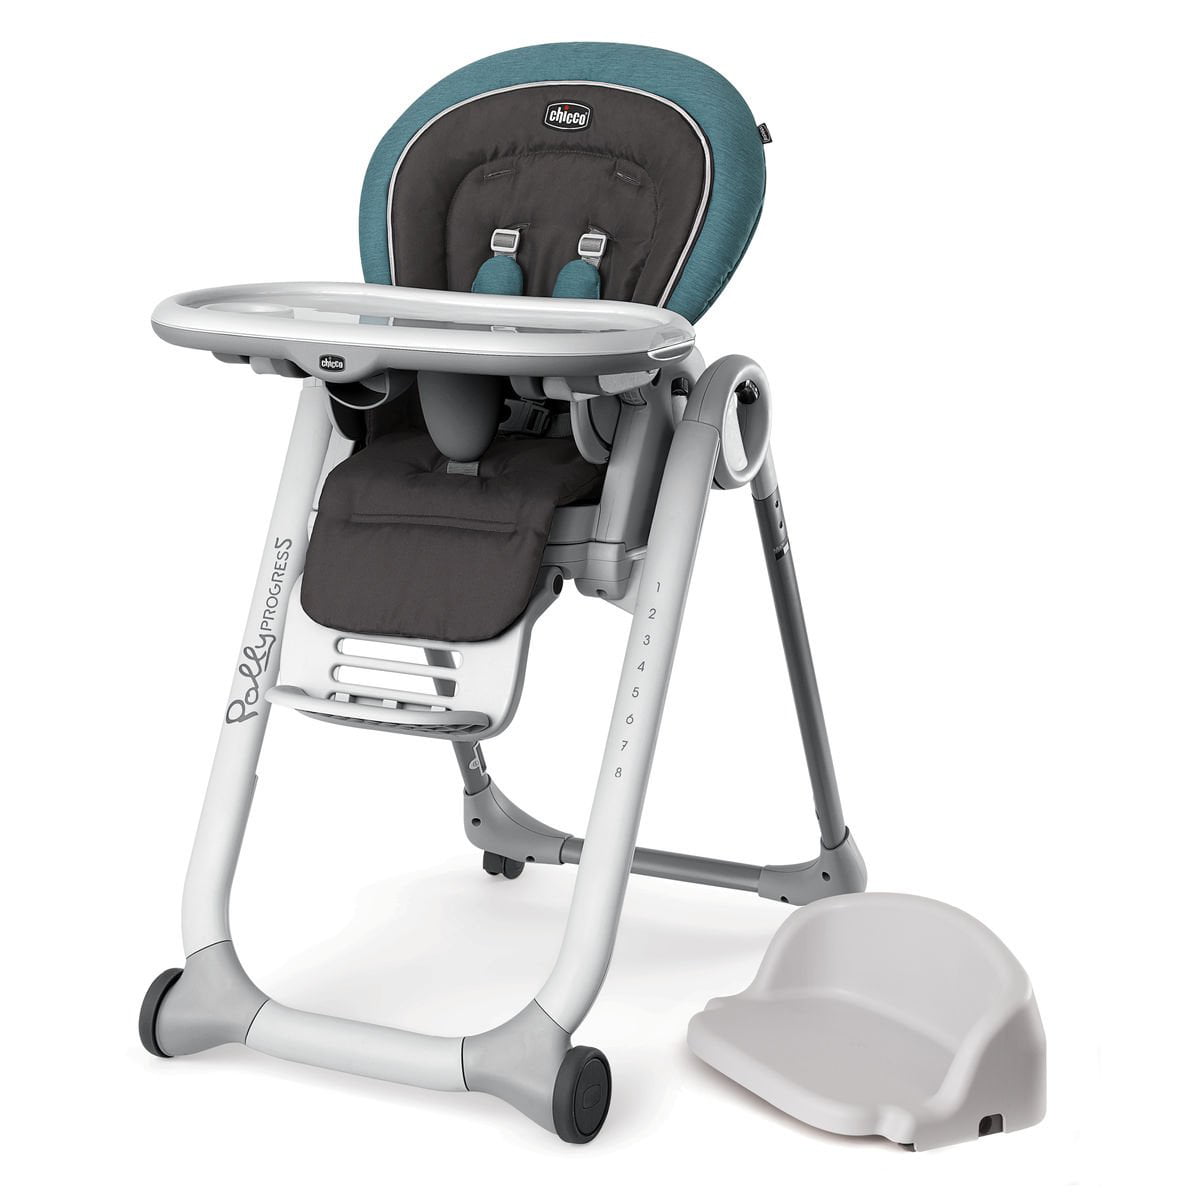 tanker Deliberately Source Chicco Polly Progress 5-in-1 Adjustable Booster Baby/Toddler Highchair,  Calypso - Walmart.com